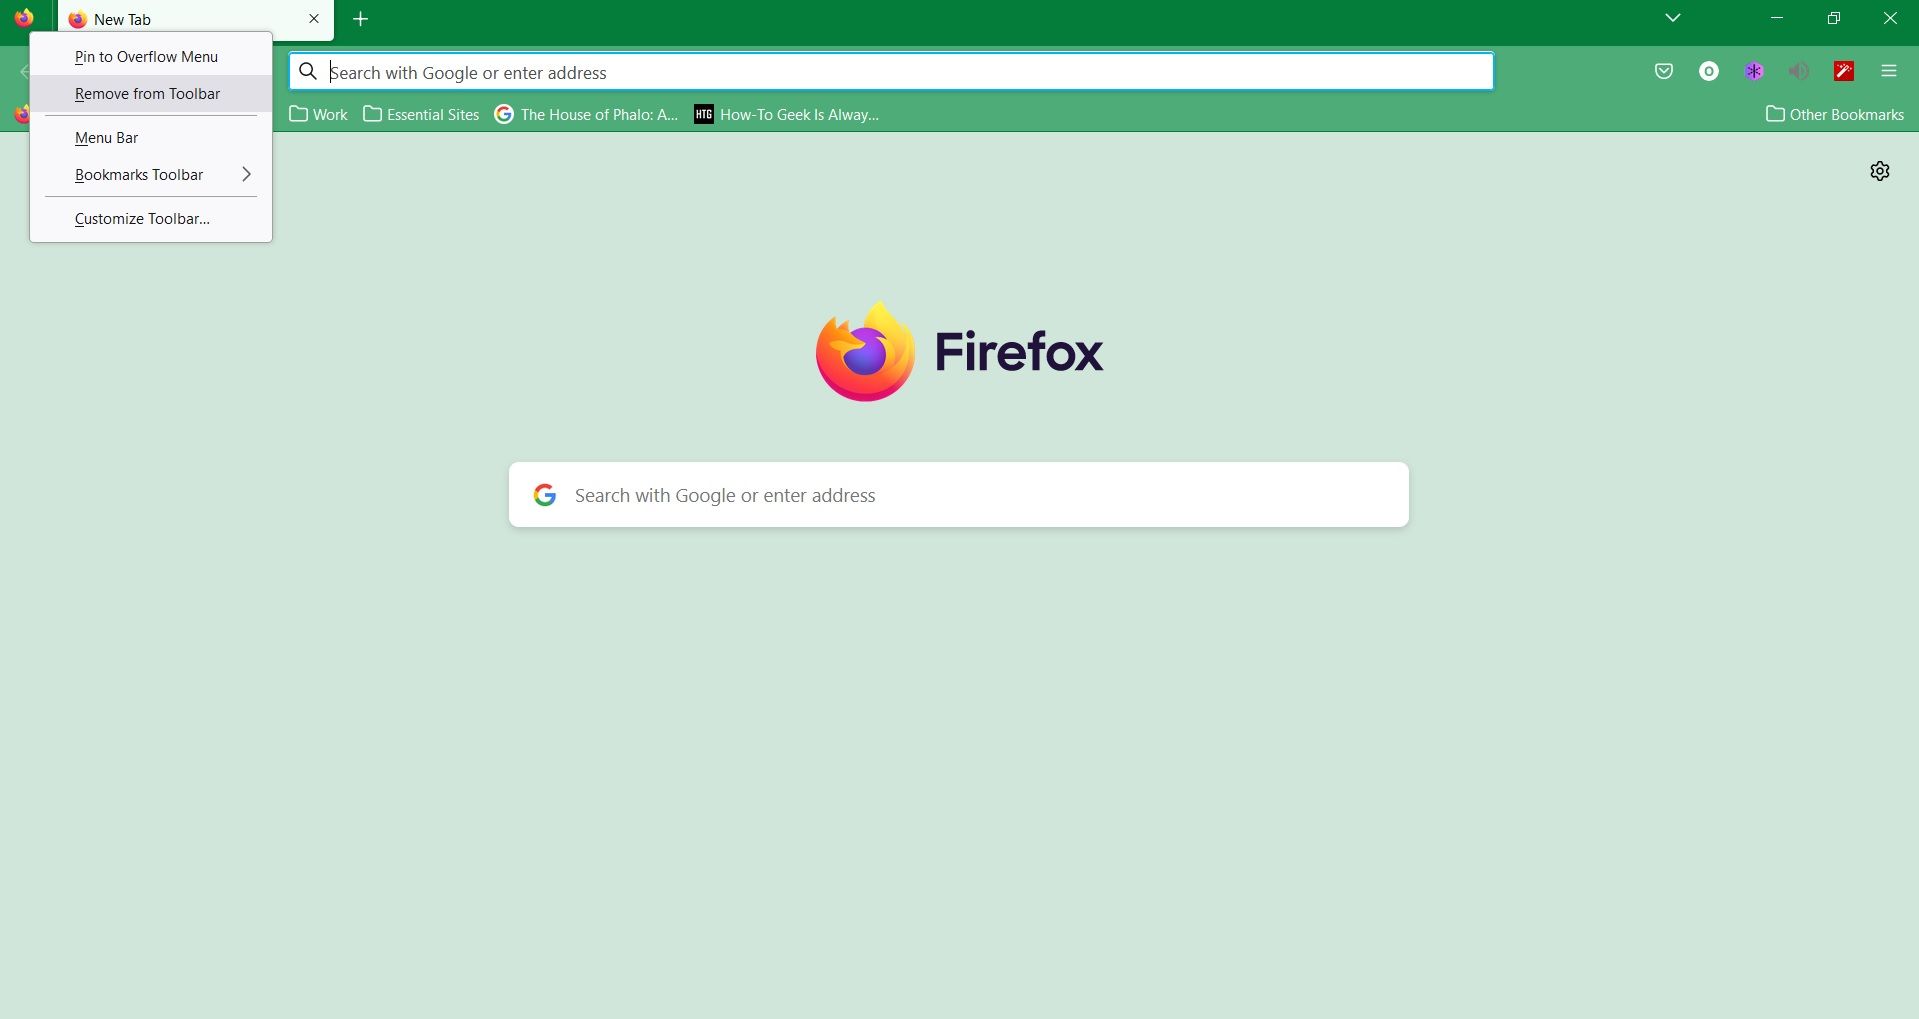 Removing tab from Firefox